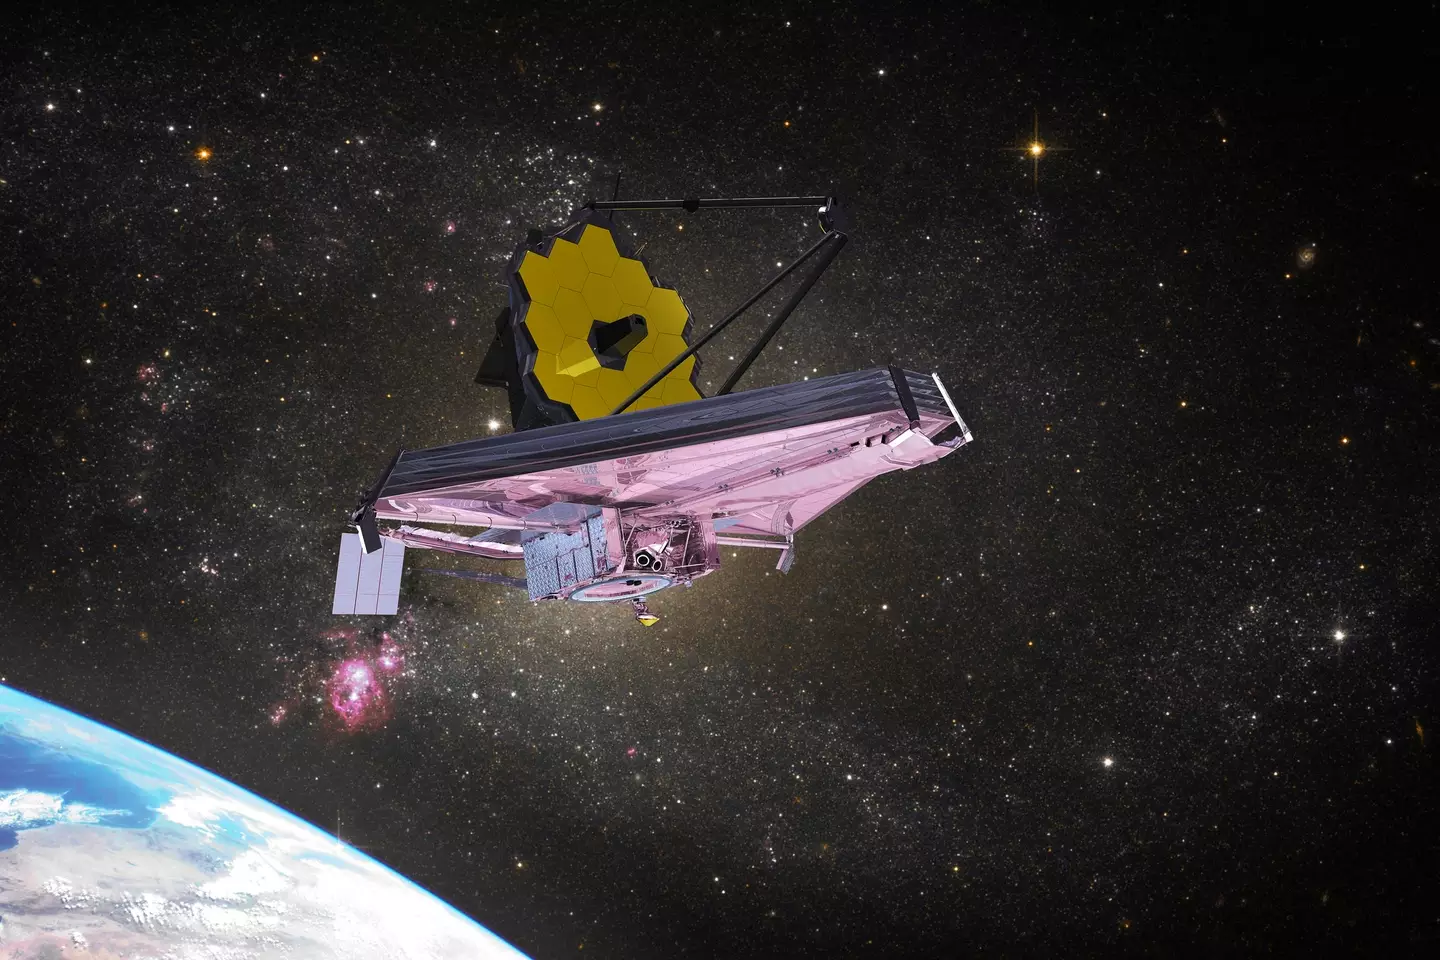 The James Webb Space Telescope has found light on an Earth-like planet.